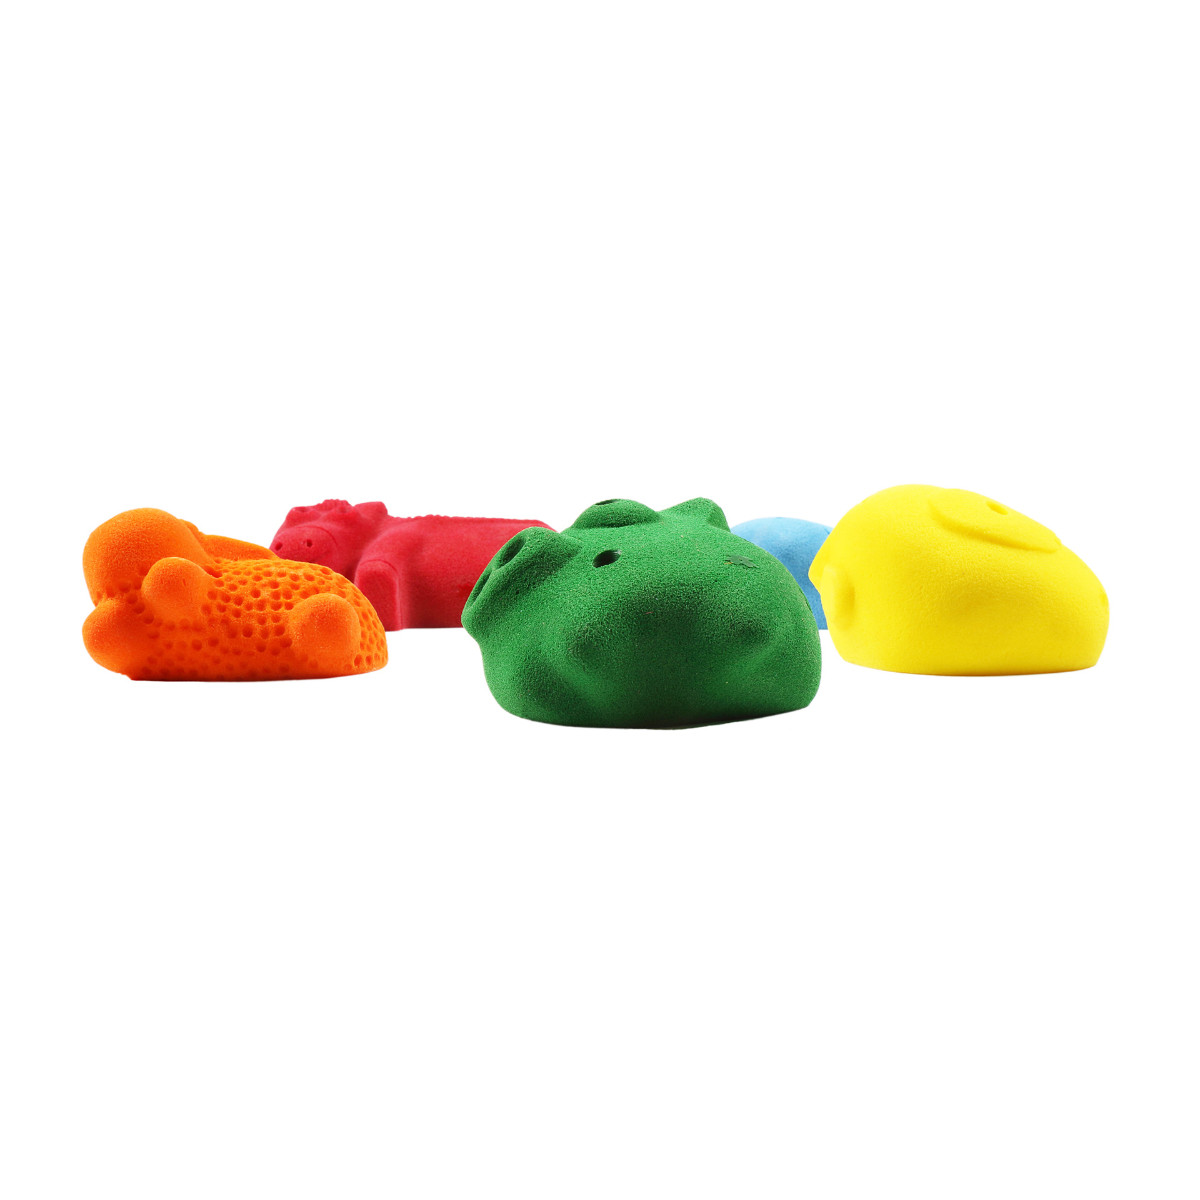 Farm Animal Climbing Holds - Screw-ons - Assorted Bright Tone Colors